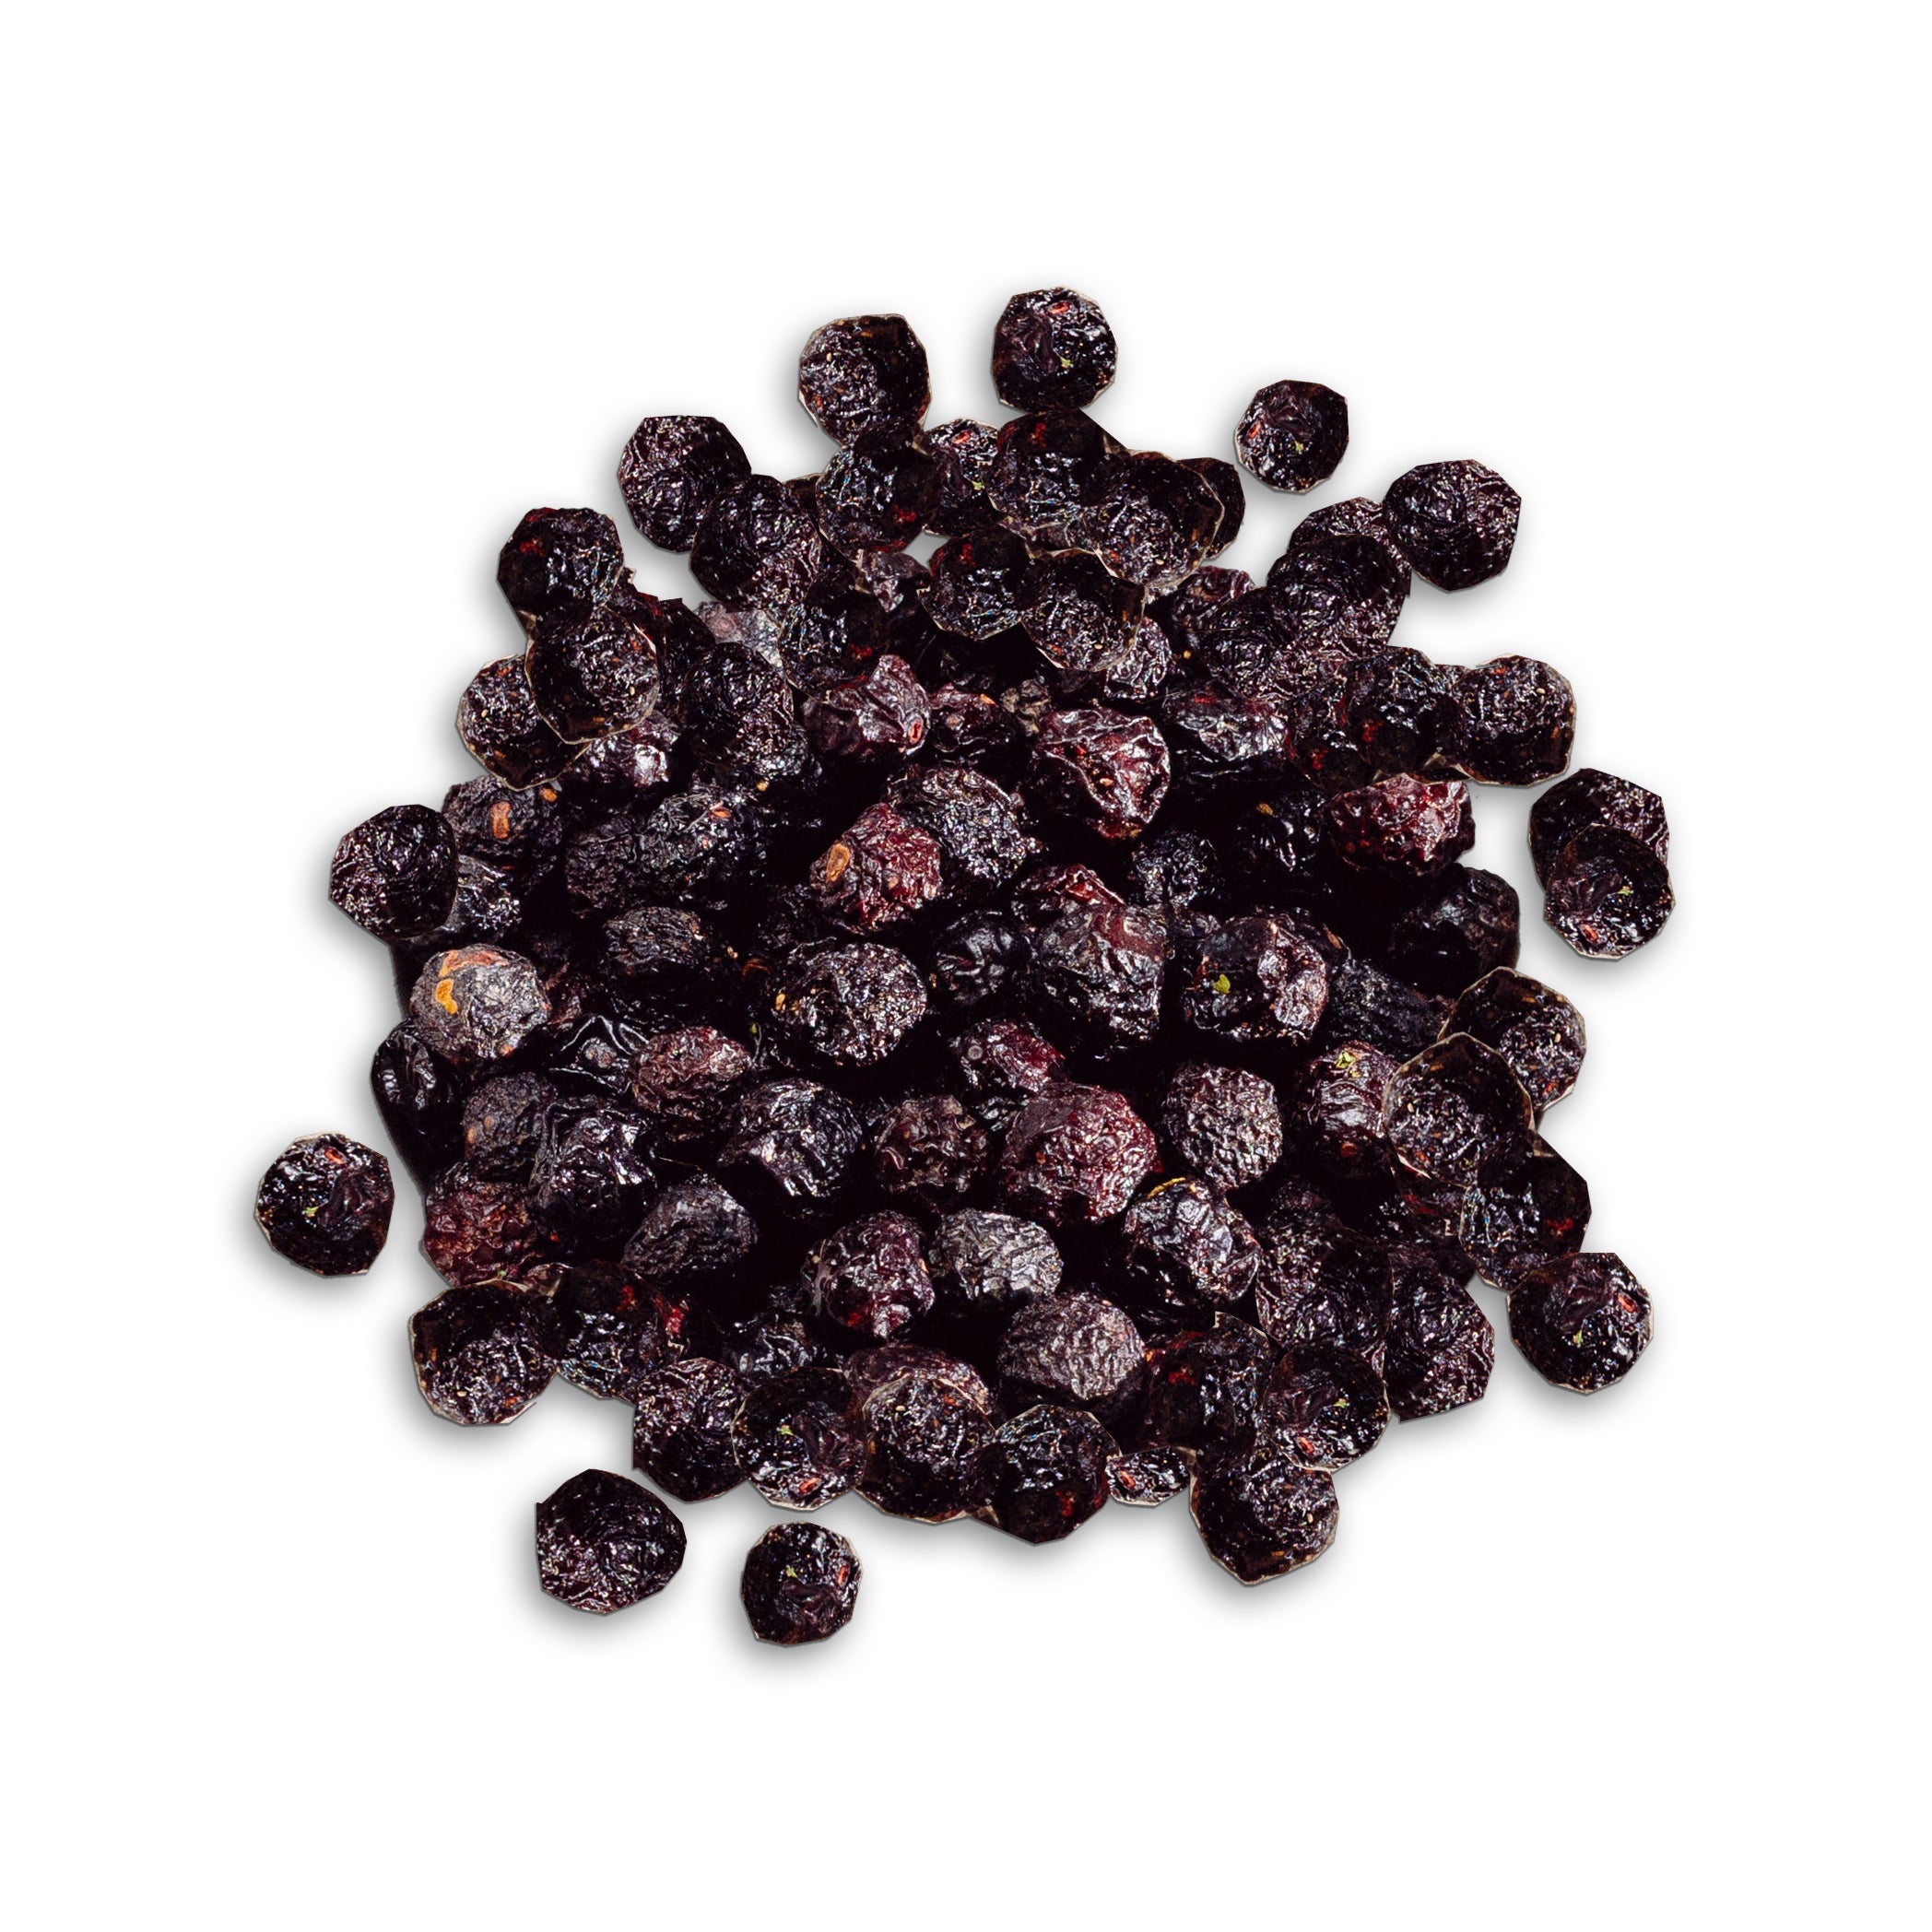 Dried Wild Blueberries (Large Bag)